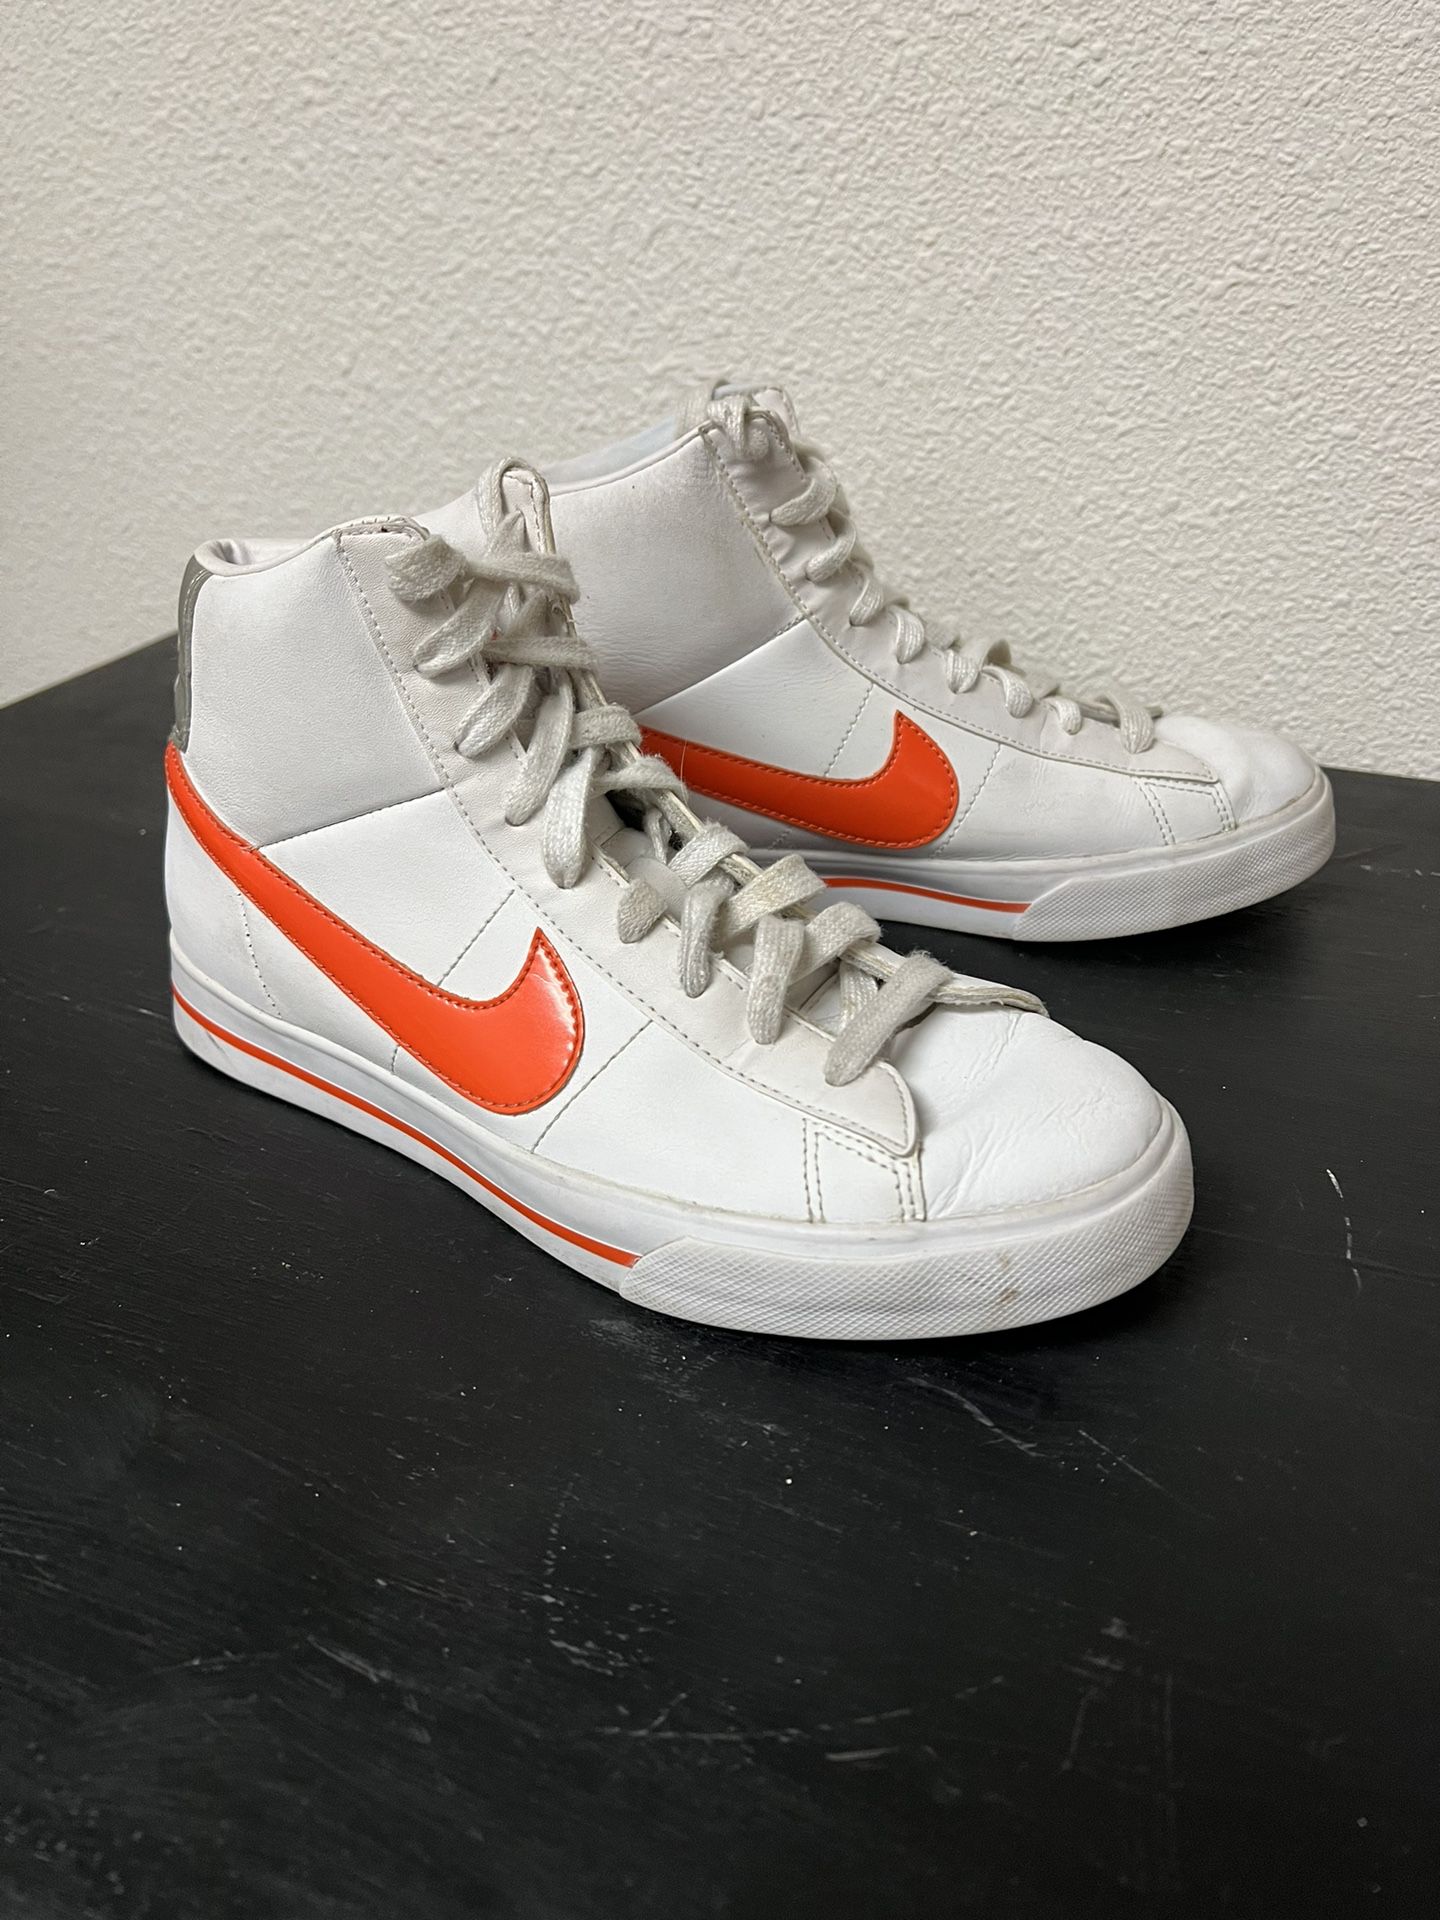 Nike BRS Classic Orange Swoosh Sneakers Size 8.5 Shoes 2009 Edition Leather High Sale in Heights, CA - OfferUp